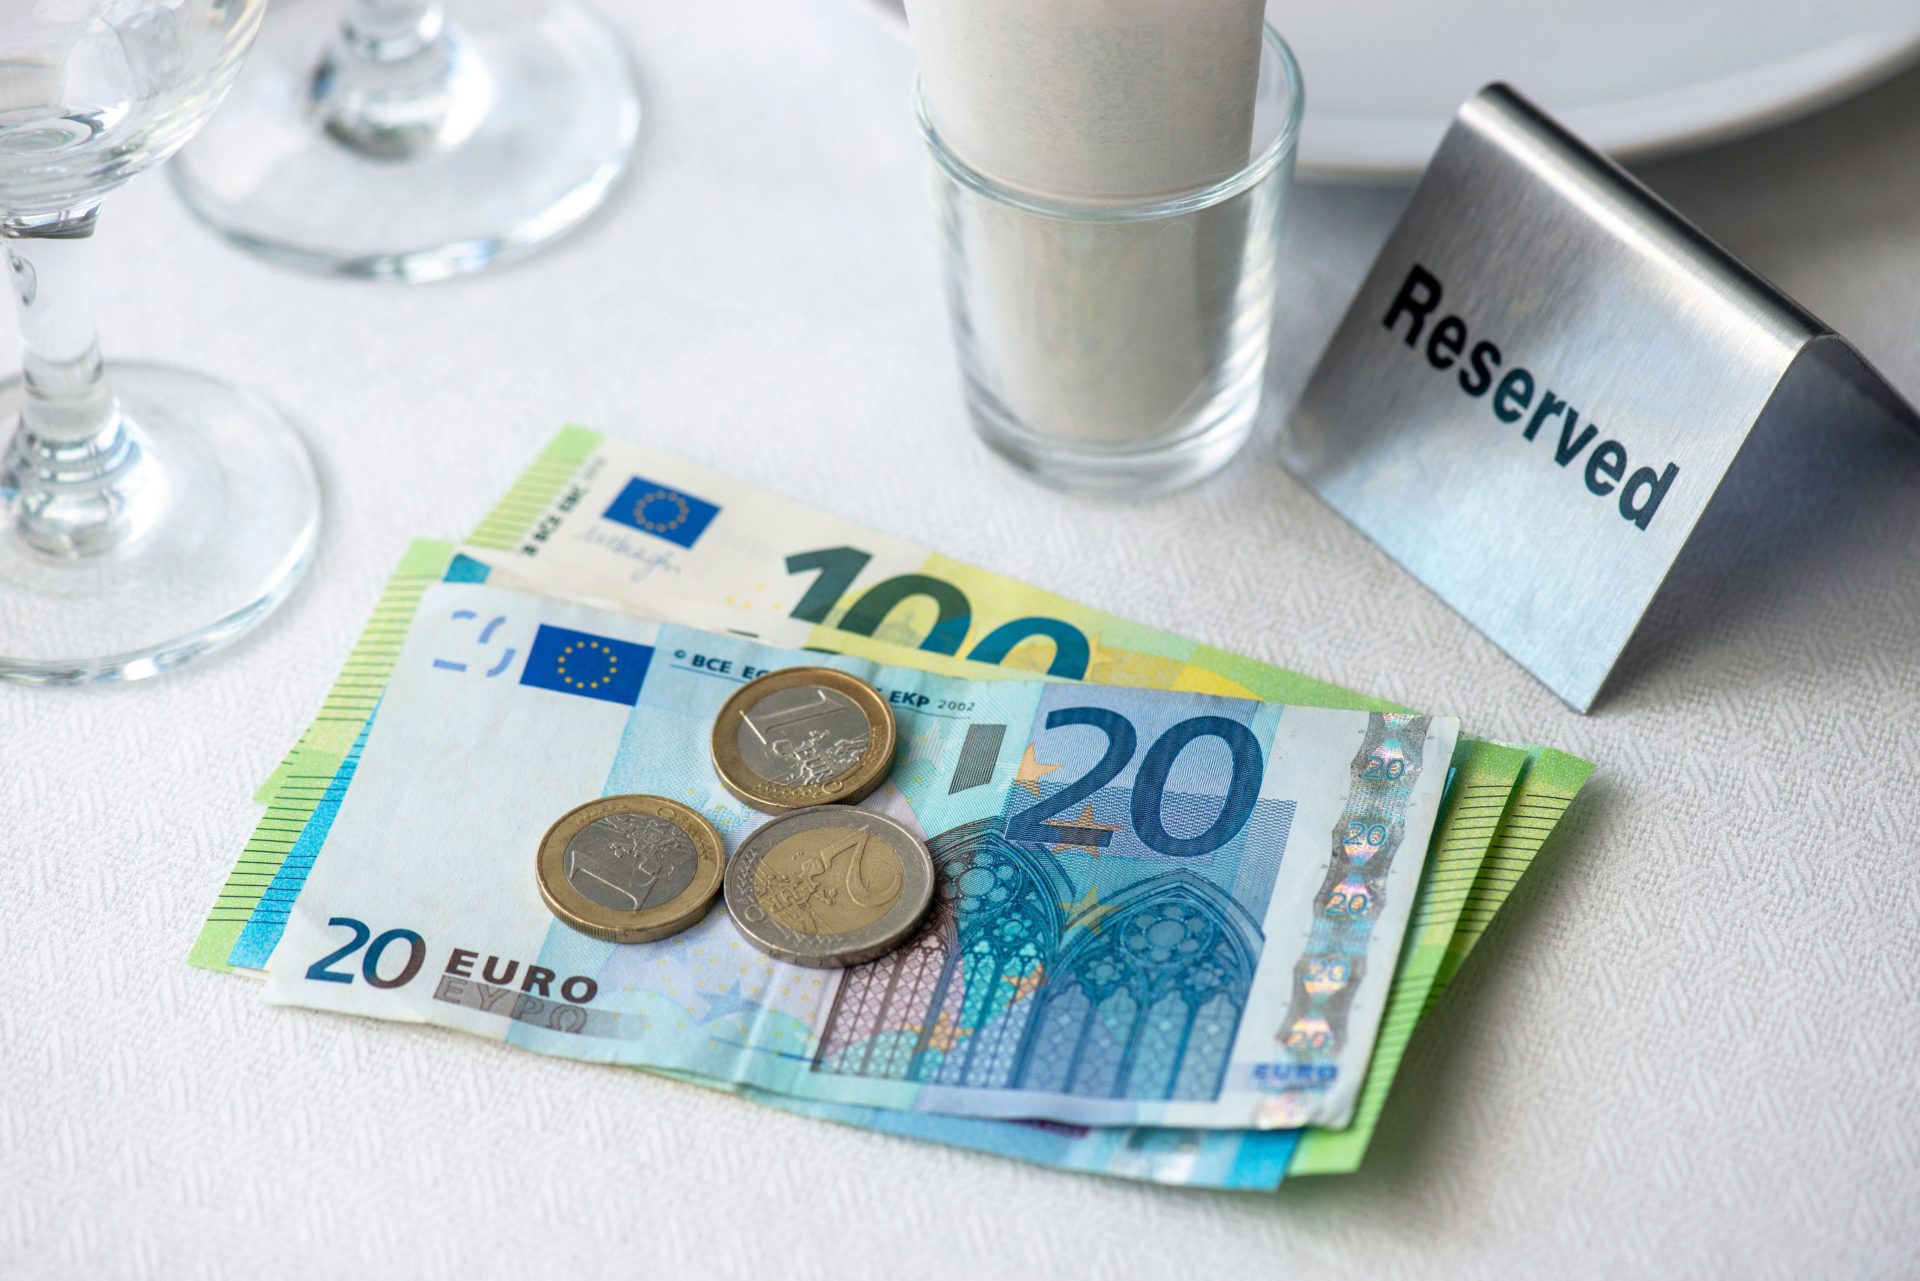 European union currency on a table with receipt bill, wine glasses, plate in restaurant in Europe